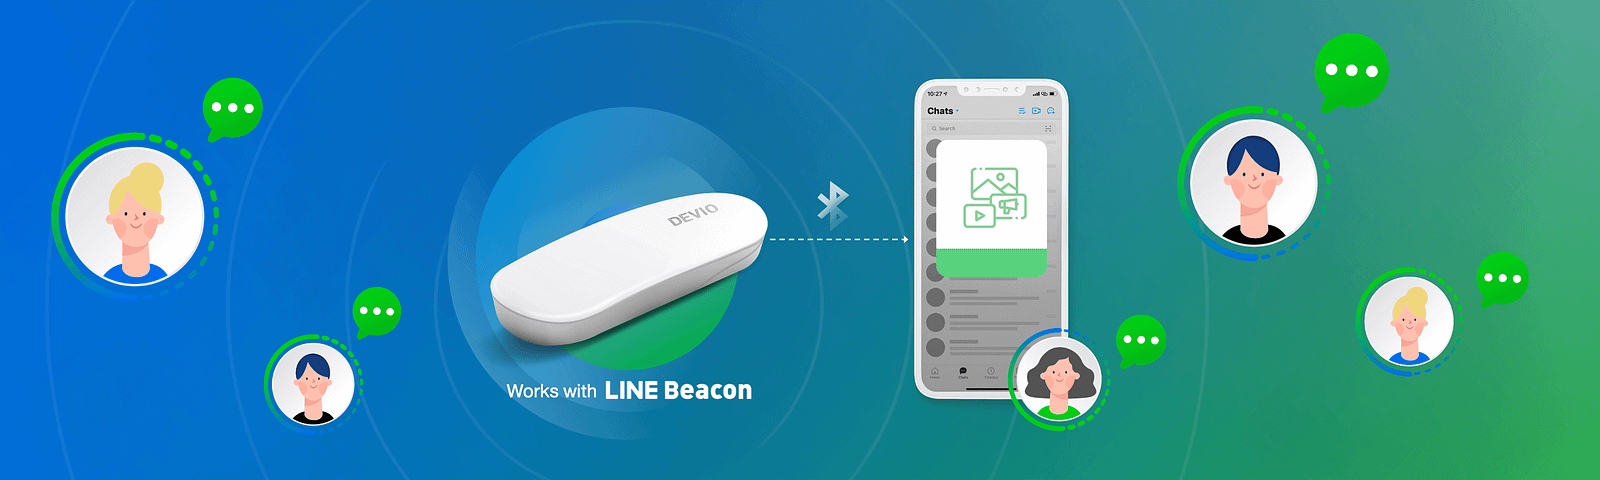 Archive Of Stories About Line Beacon Medium